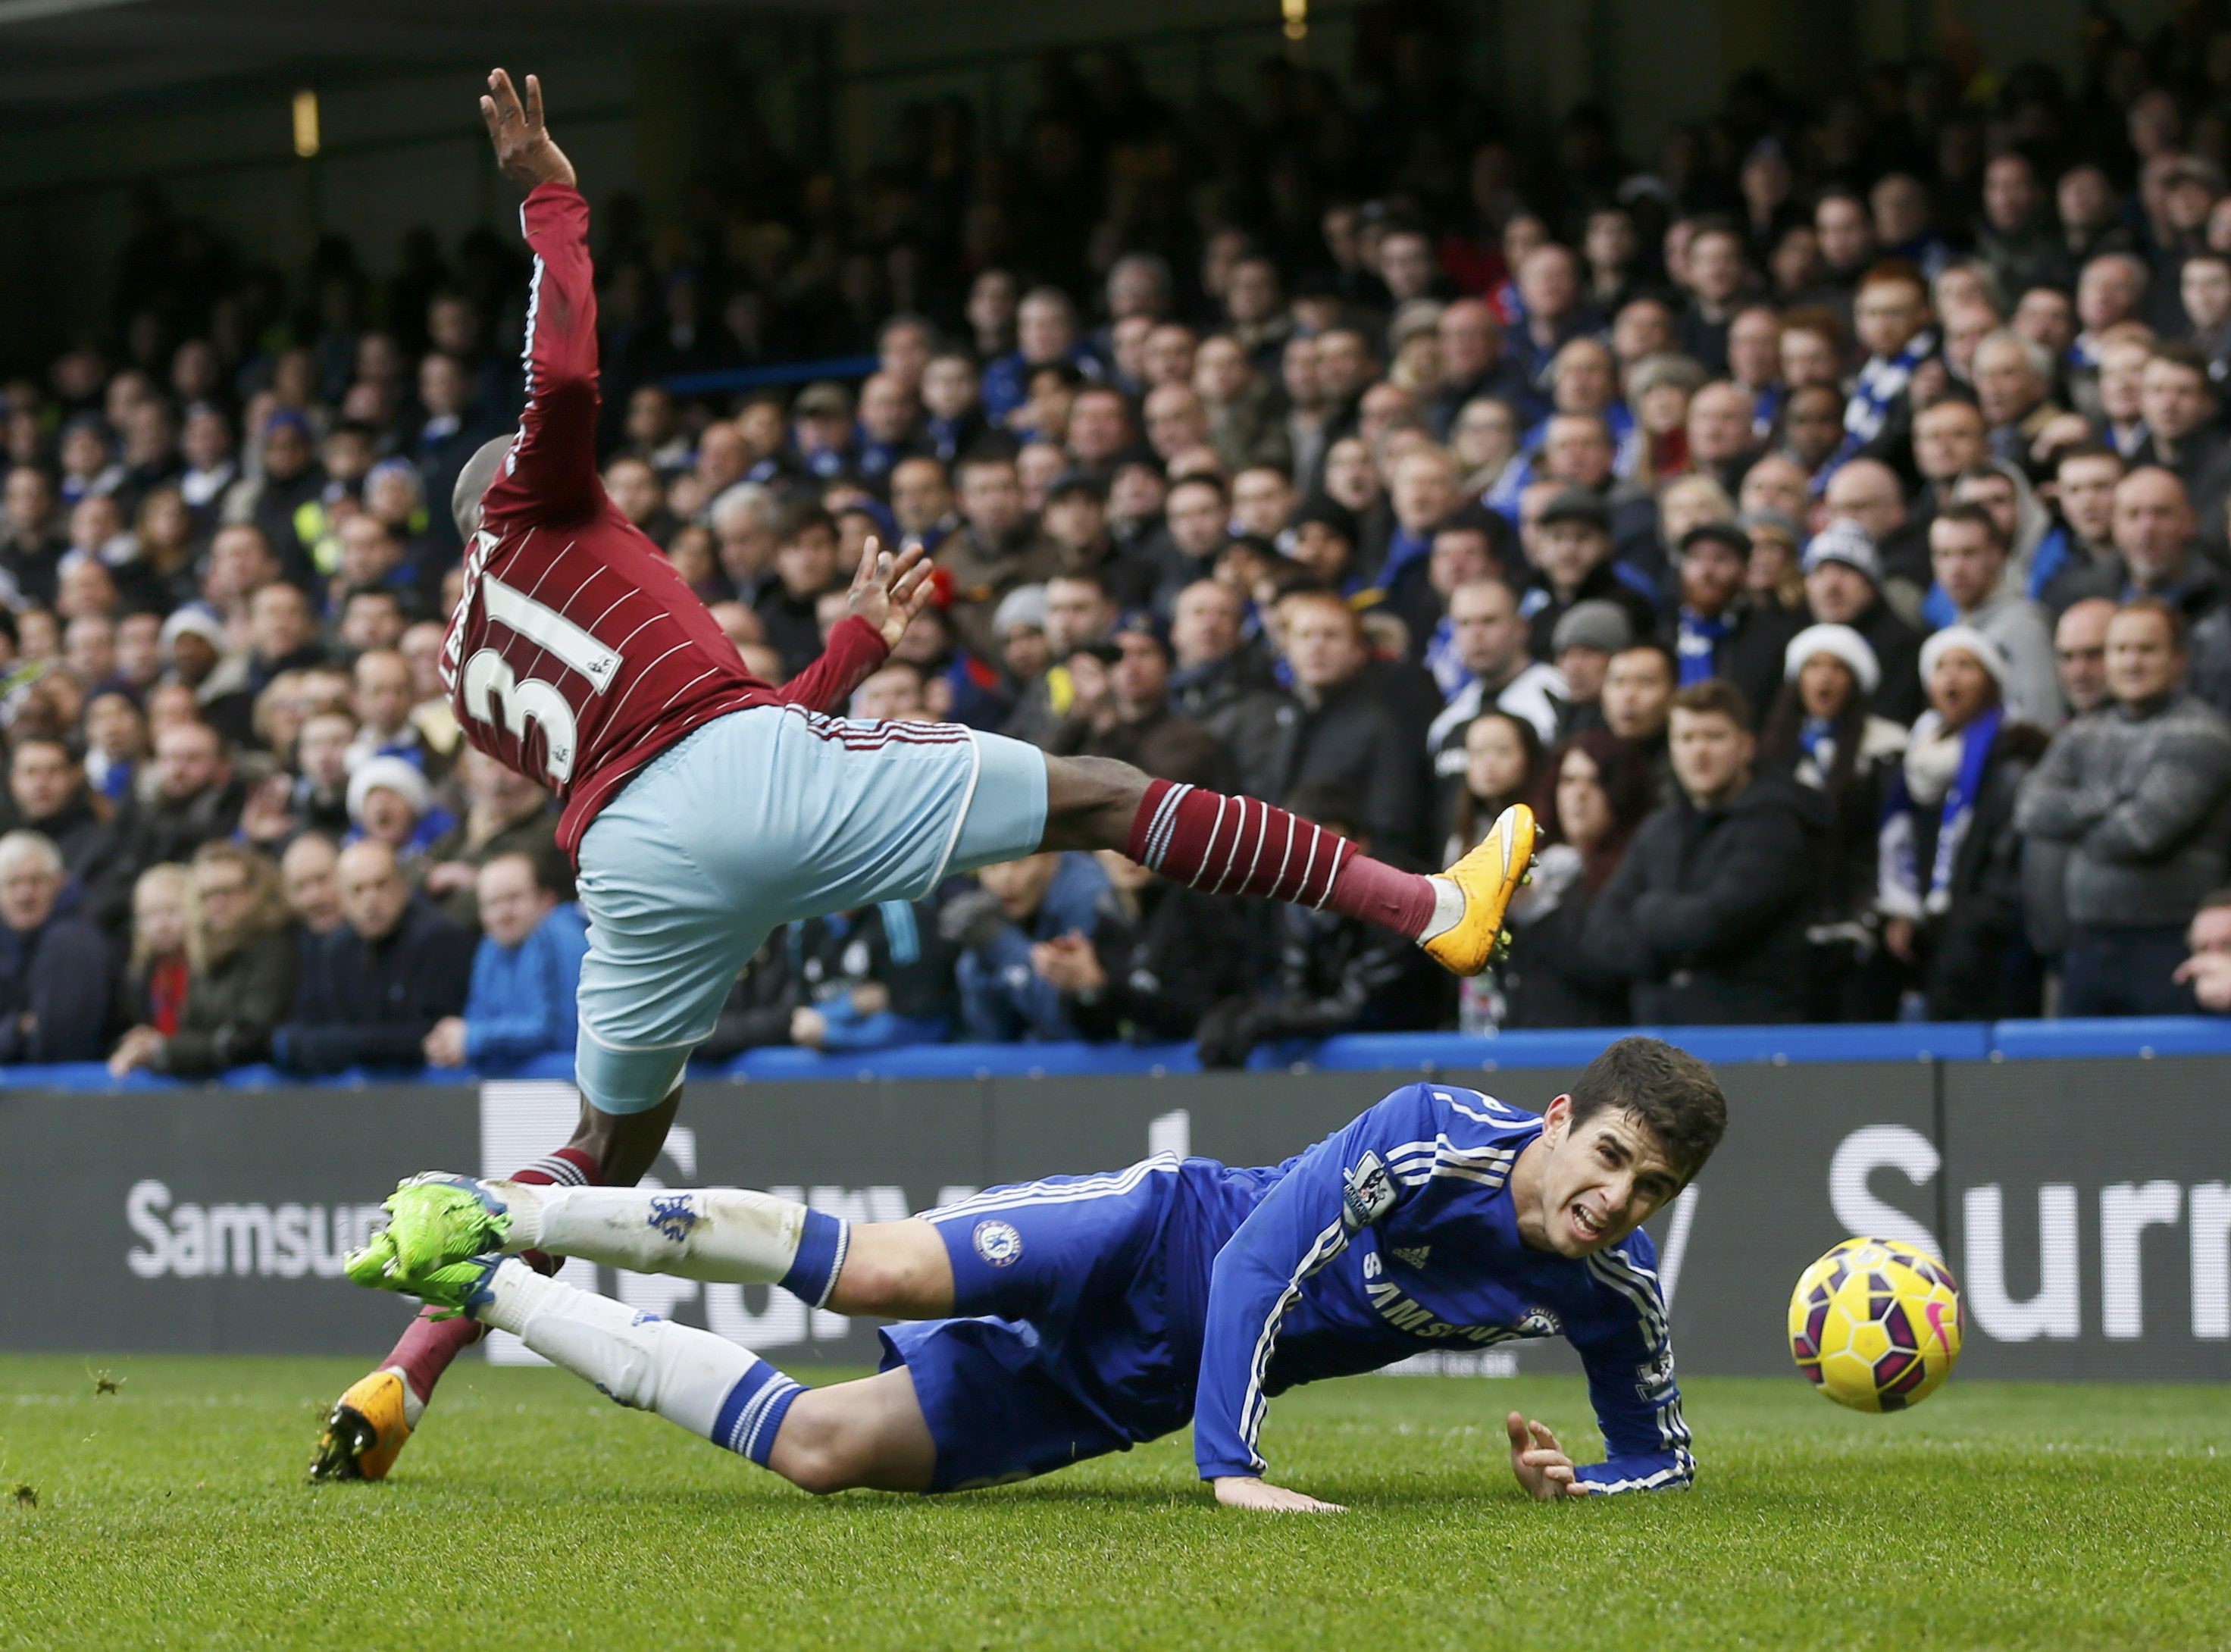 Chelsea's Oscar (ON GROUND) is challenged by West Ham United's Enner Valencia during their English Premier League soccer match at Stamford Bridge in London, December 26, 2014. REUTERS/Stefan Wermuth (BRITAIN - Tags: SOCCER SPORT) FOR EDITORIAL USE ONLY. NOT FOR SALE FOR MARKETING OR ADVERTISING CAMPAIGNS. EDITORIAL USE ONLY. NO USE WITH UNAUTHORIZED AUDIO, VIDEO, DATA, FIXTURE LISTS, CLUB/LEAGUE LOGOS OR 'LIVE' SERVICES. ONLINE IN-MATCH USE LIMITED TO 45 IMAGES, NO VIDEO EMULATION. NO USE IN BETTING, GAMES OR SINGLE CLUB/LEAGUE/PLAYER PUBLICATIONS.